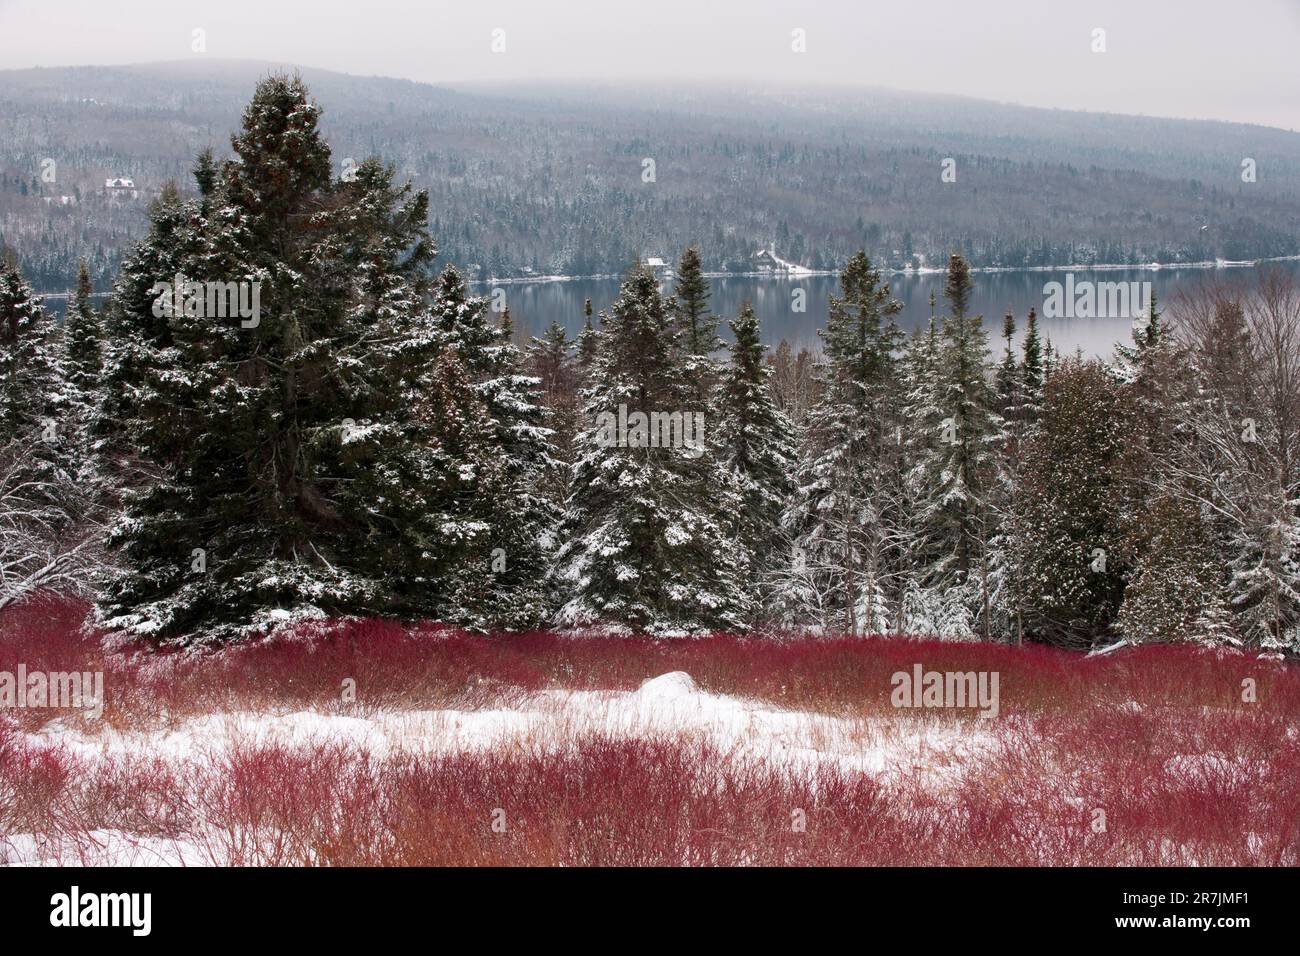 Red stems of high bush blueberry (Vaccinium corymbosum ) provide a colorful foreground for view of Rangeley Lake at the Rt. 4 overlook in Rangeley, Maine. Stock Photo